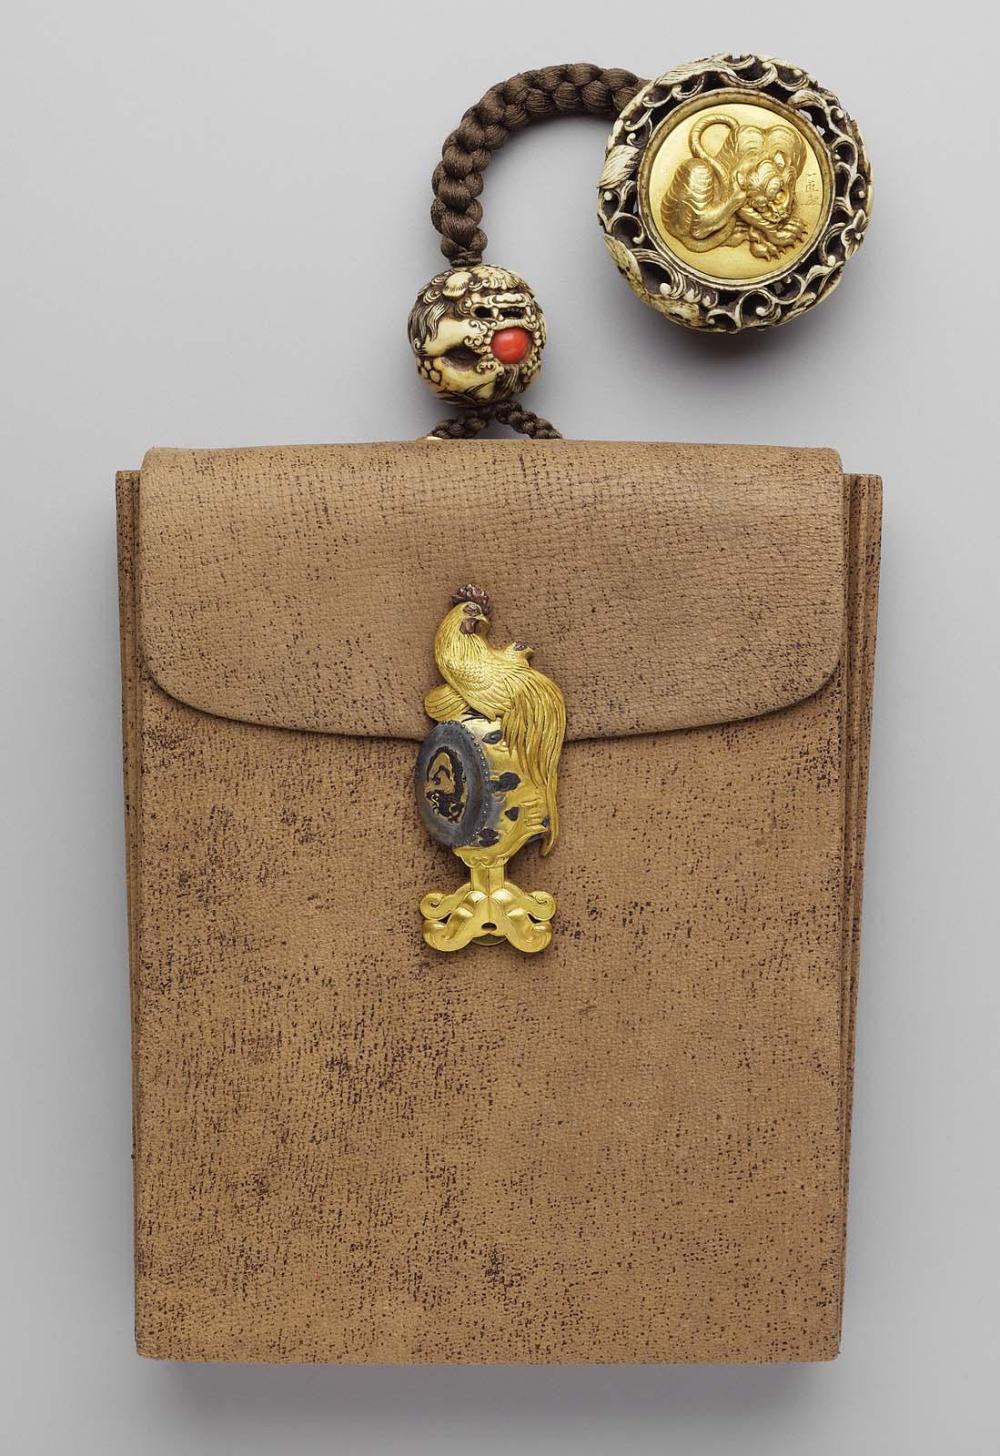 Tobaccopouch; kagami netsuke with design of a tiger; kanamono in the